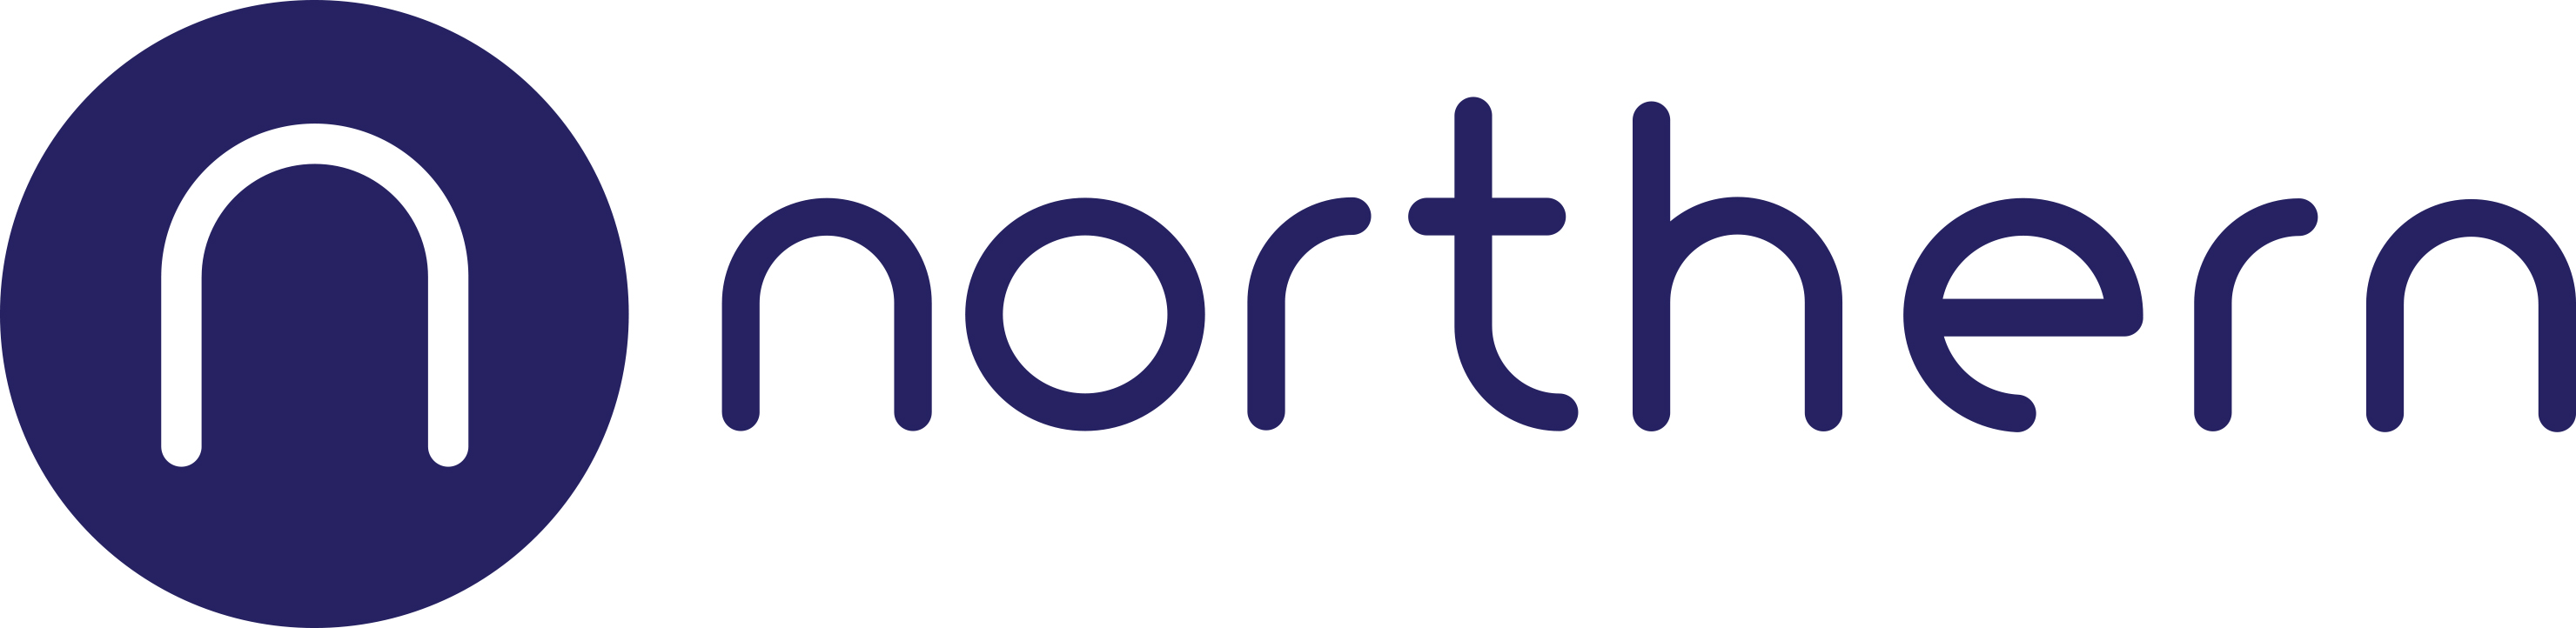 logo for Northern Trains